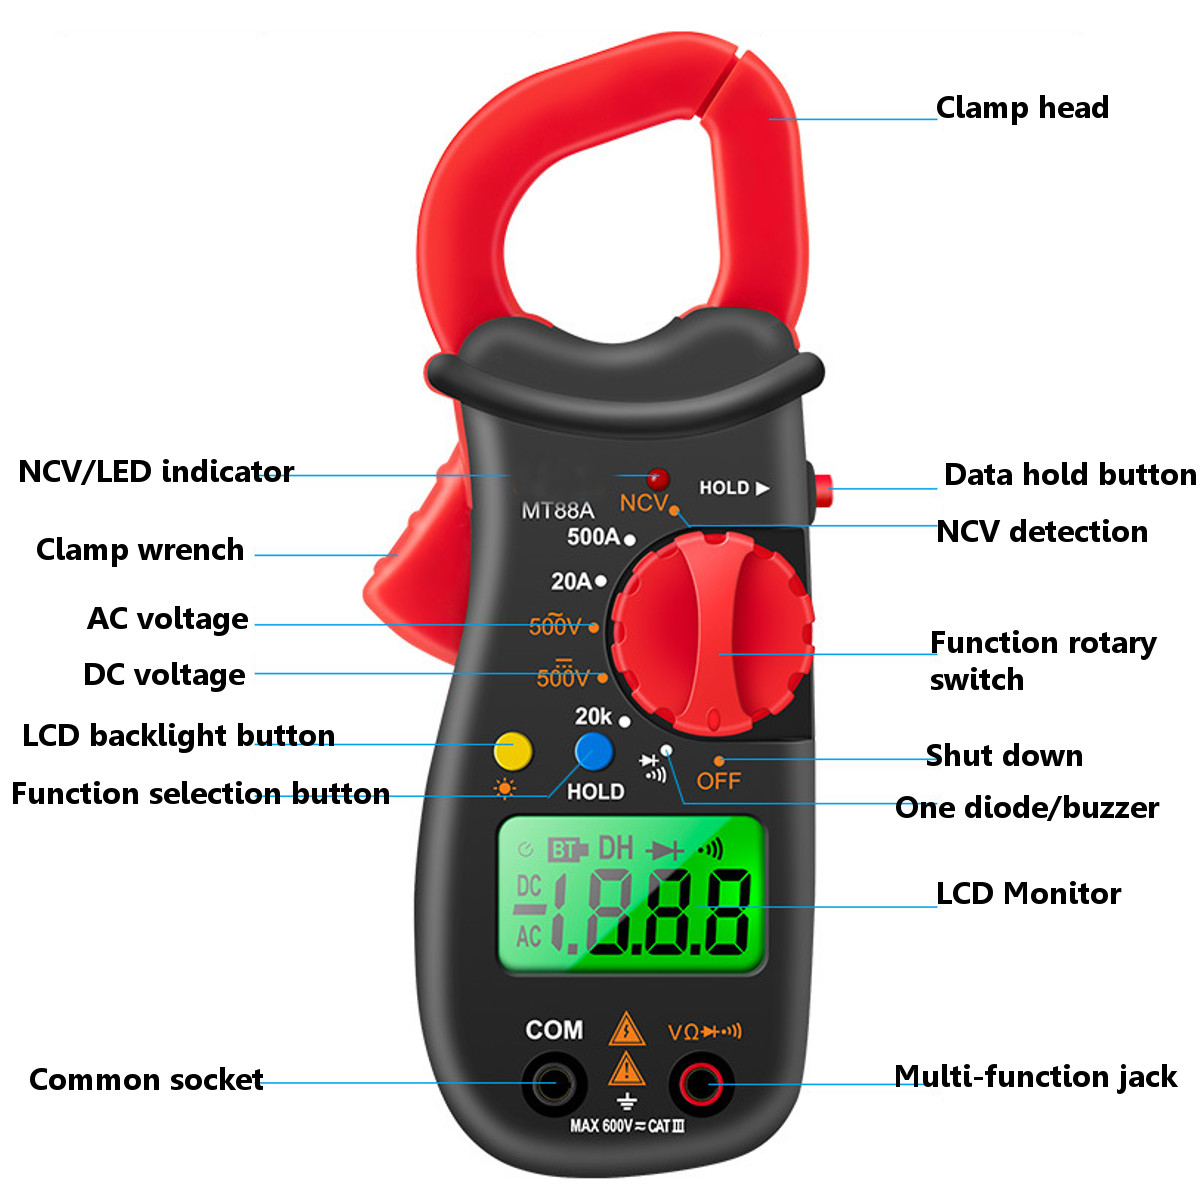 ANENG-MT88A-Digital-Clamp-Meter-Multimeter-DCAC-Voltage-AC-Current-Tester-Frequency-Capacitance-NCV--1751874-2